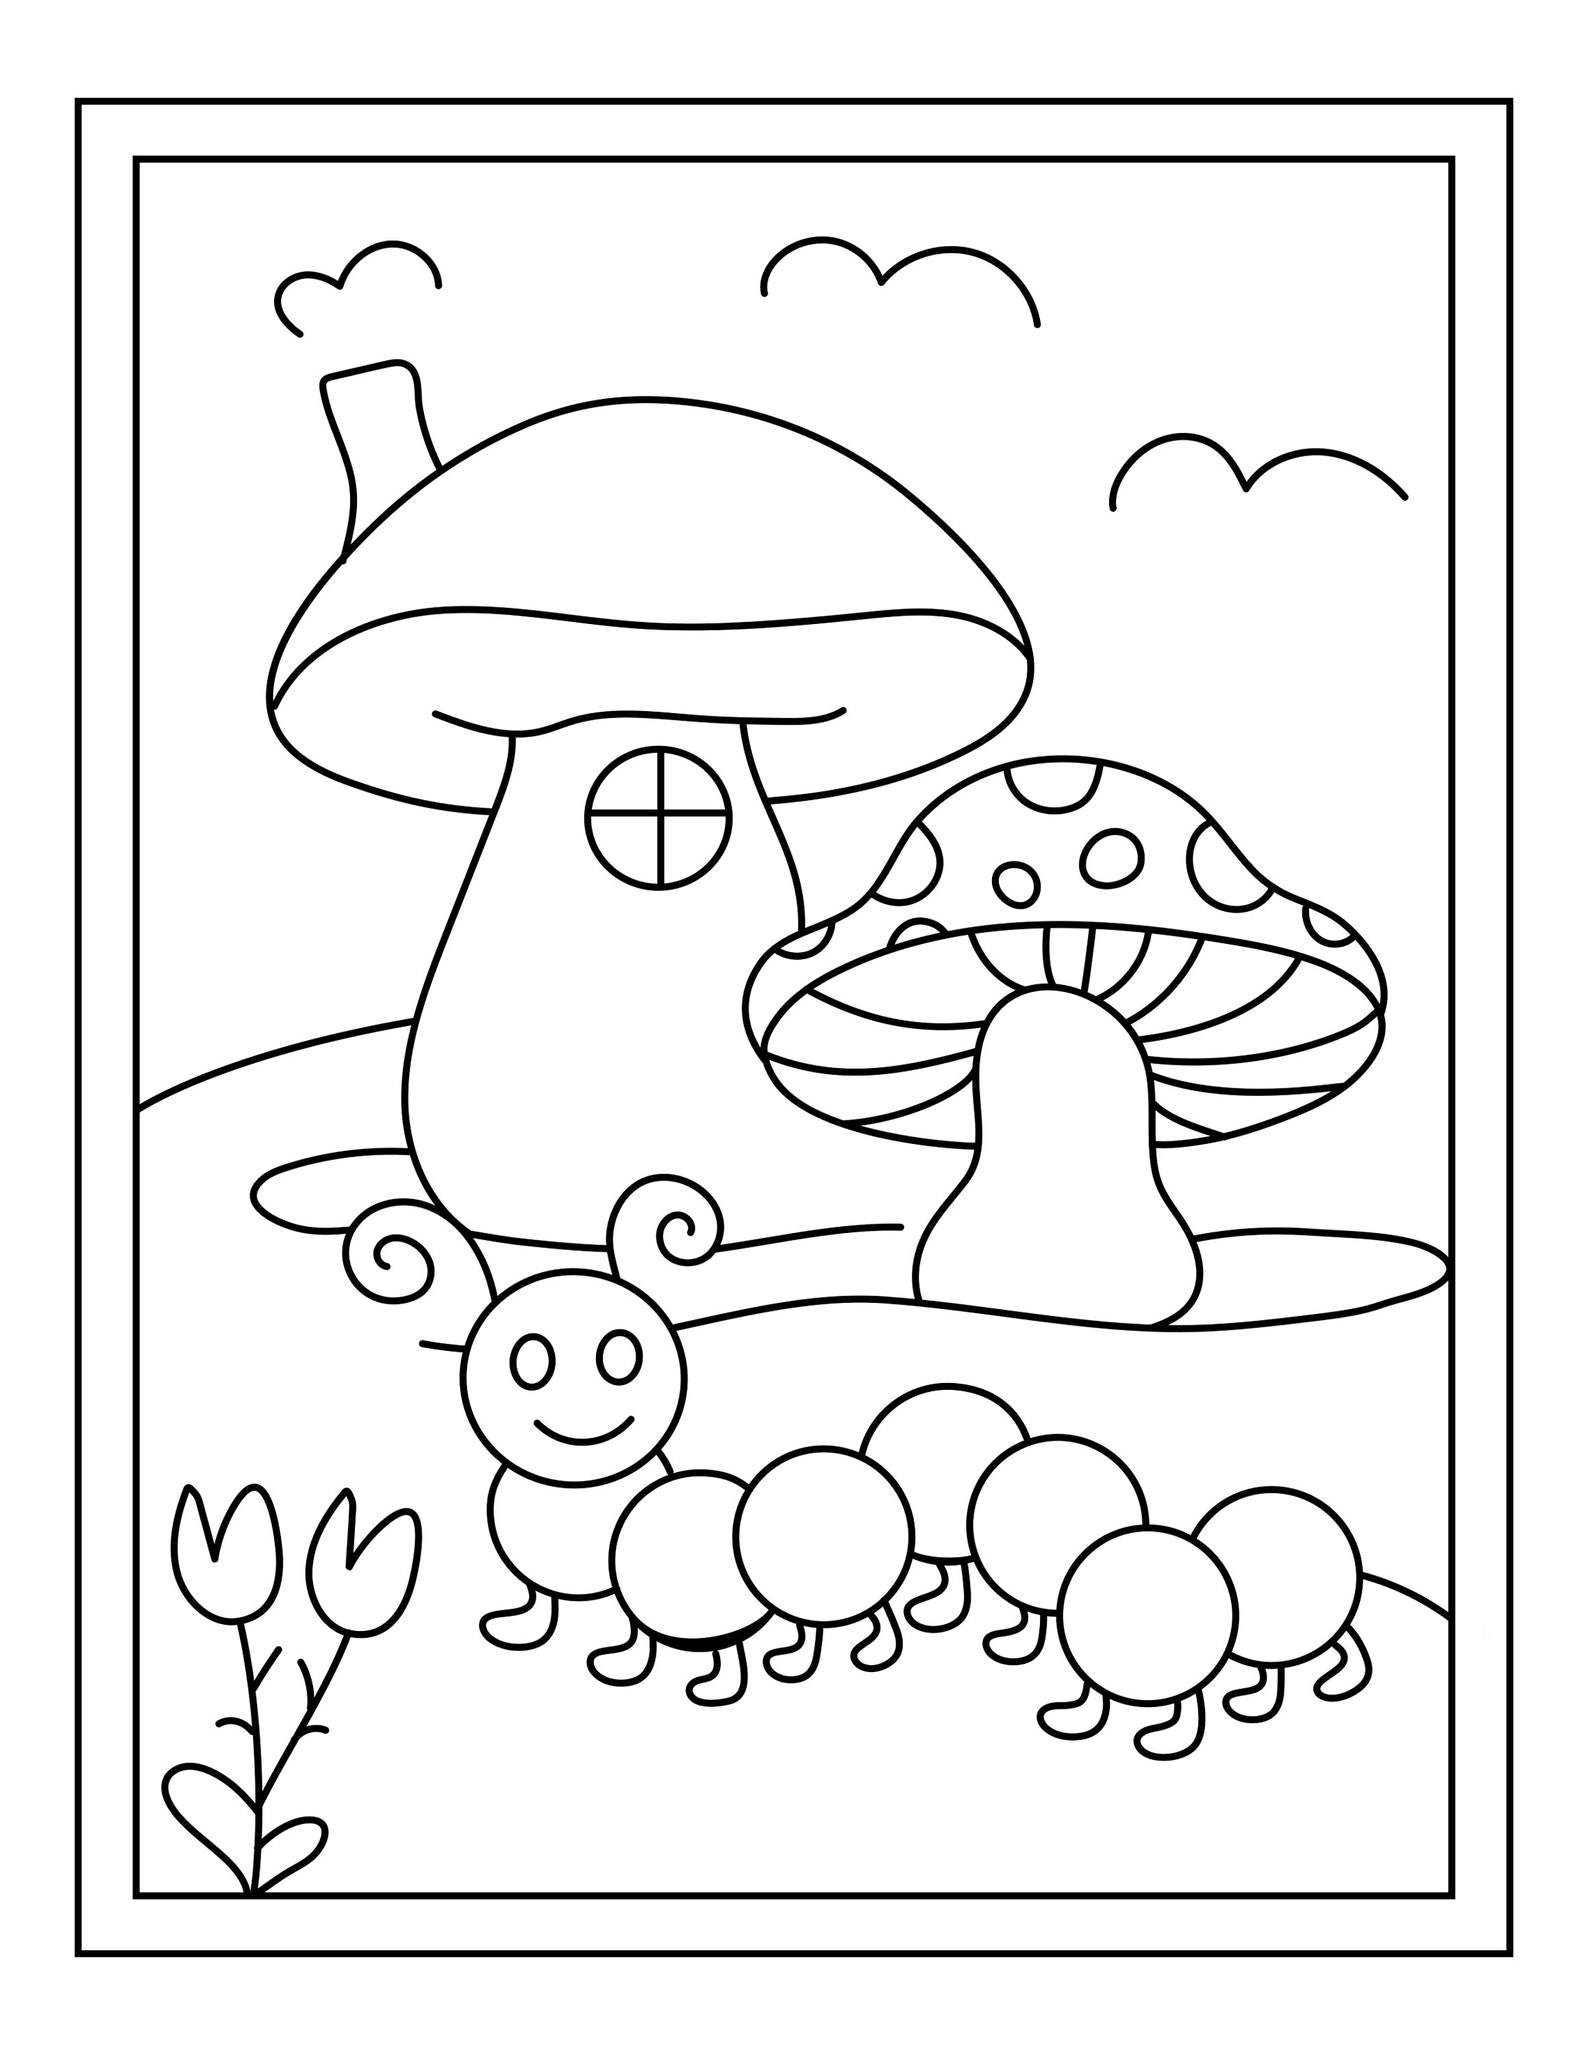 Nature Printable 16 Coloring Pages Etsy